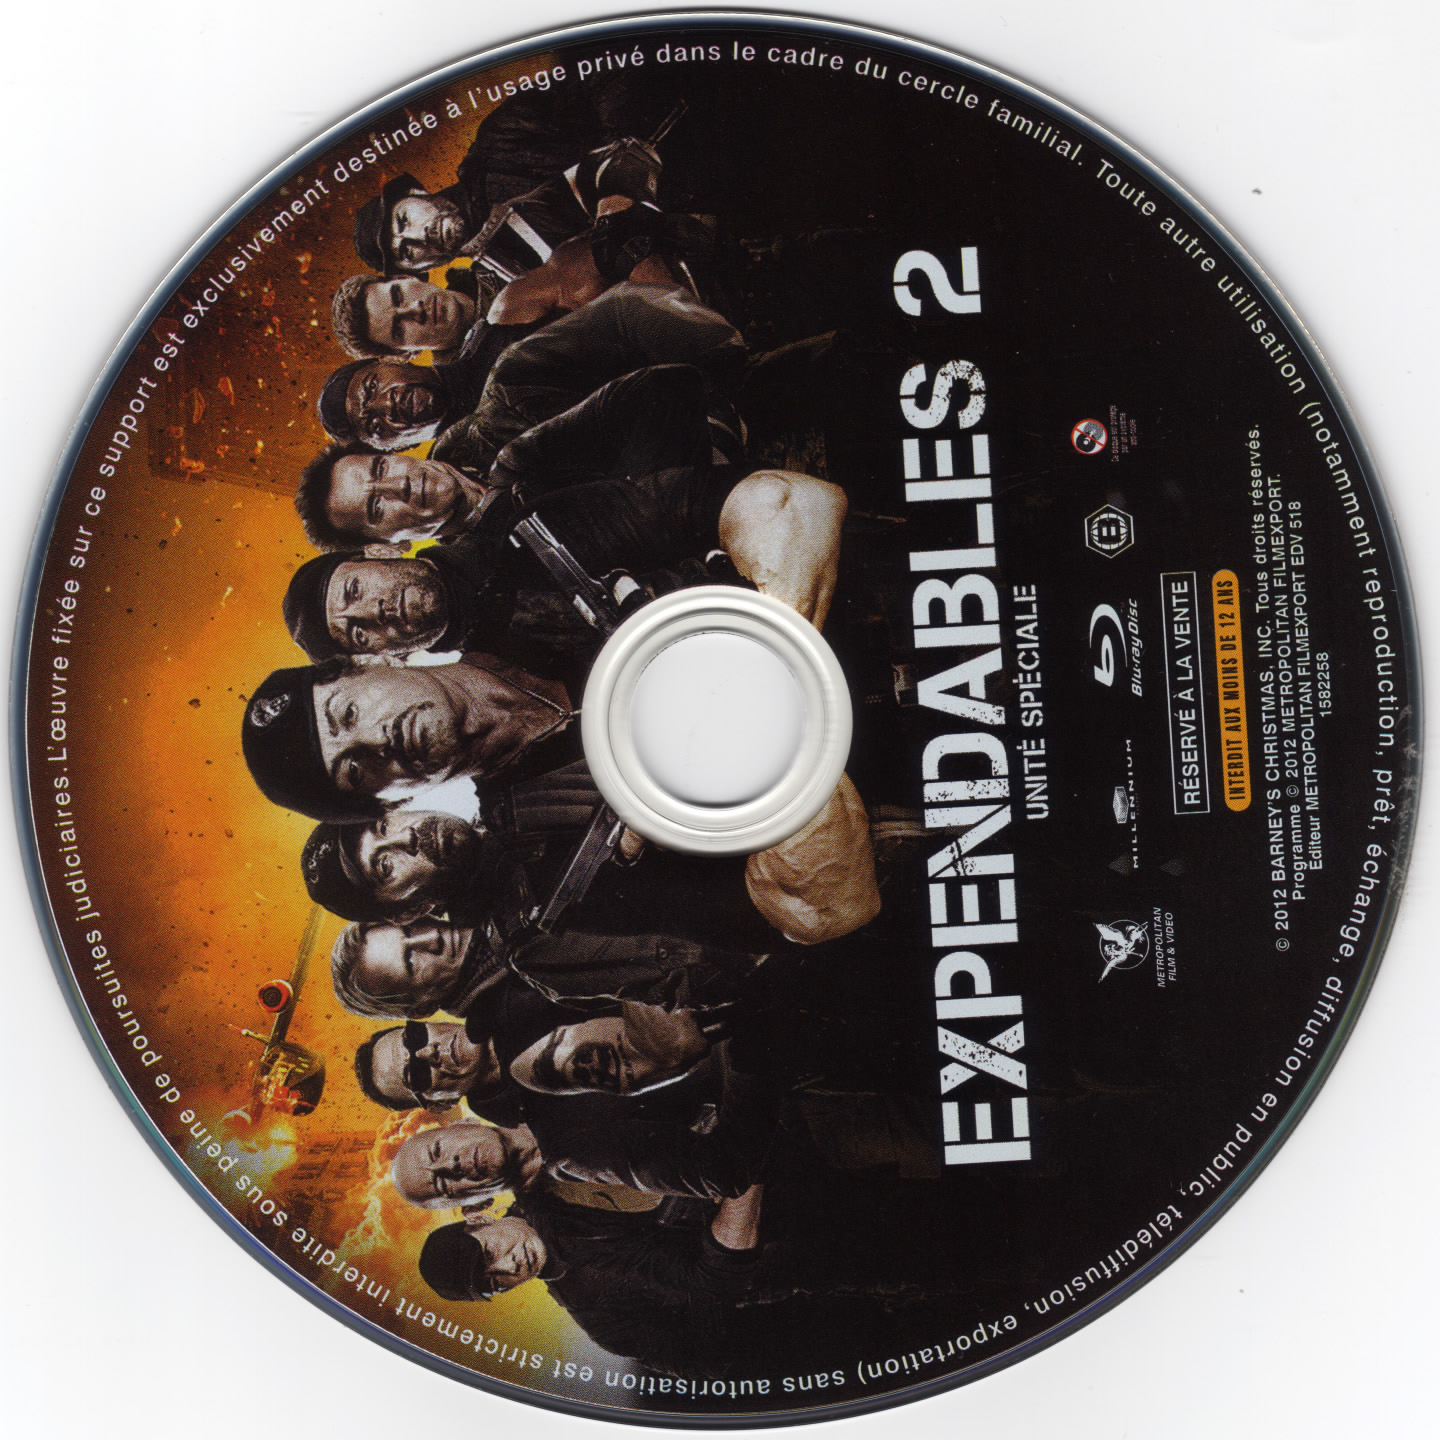 Expendables 2 (BLU-RAY)